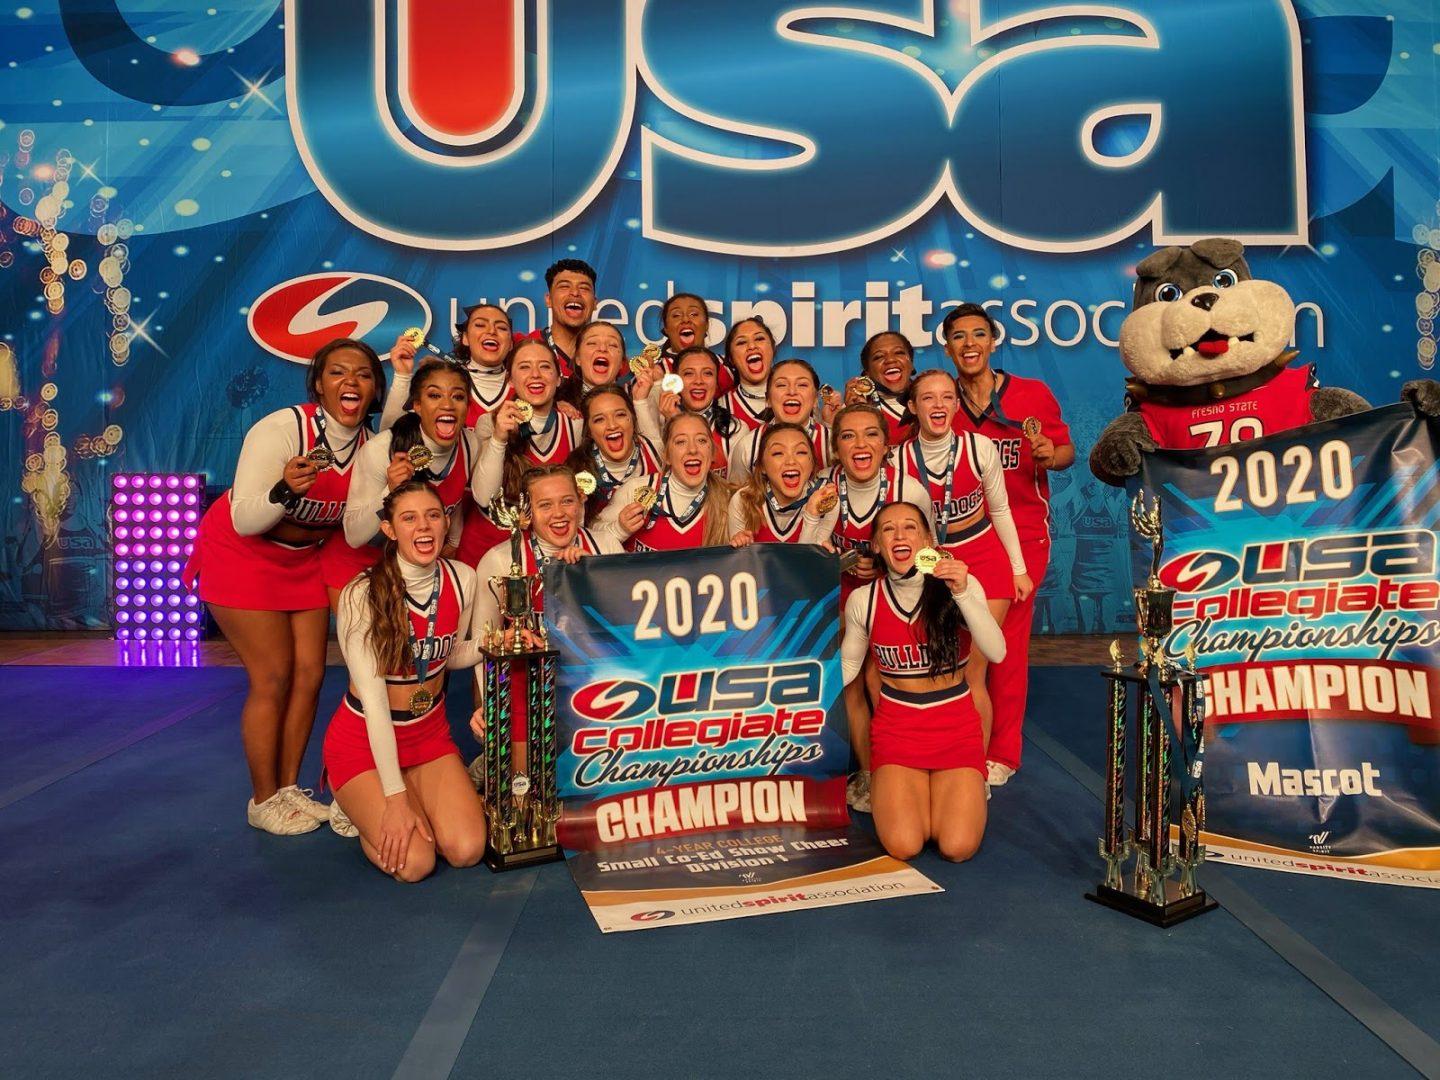 The+Fresno+State+cheer+team+%28left%29+and+mascot%2C+TimeOut%2C+%28right%29+celebrate+their+first+place+trophies+and+medals+at+the+USA+Collegiate+Championships.+Fresno+State+finished+with+a+score+of+89.51+in+Division+I+small+co-ed+show+cheer+among+4-year+colleges.+%28Courtesy+Fresno+State+Spirit%29